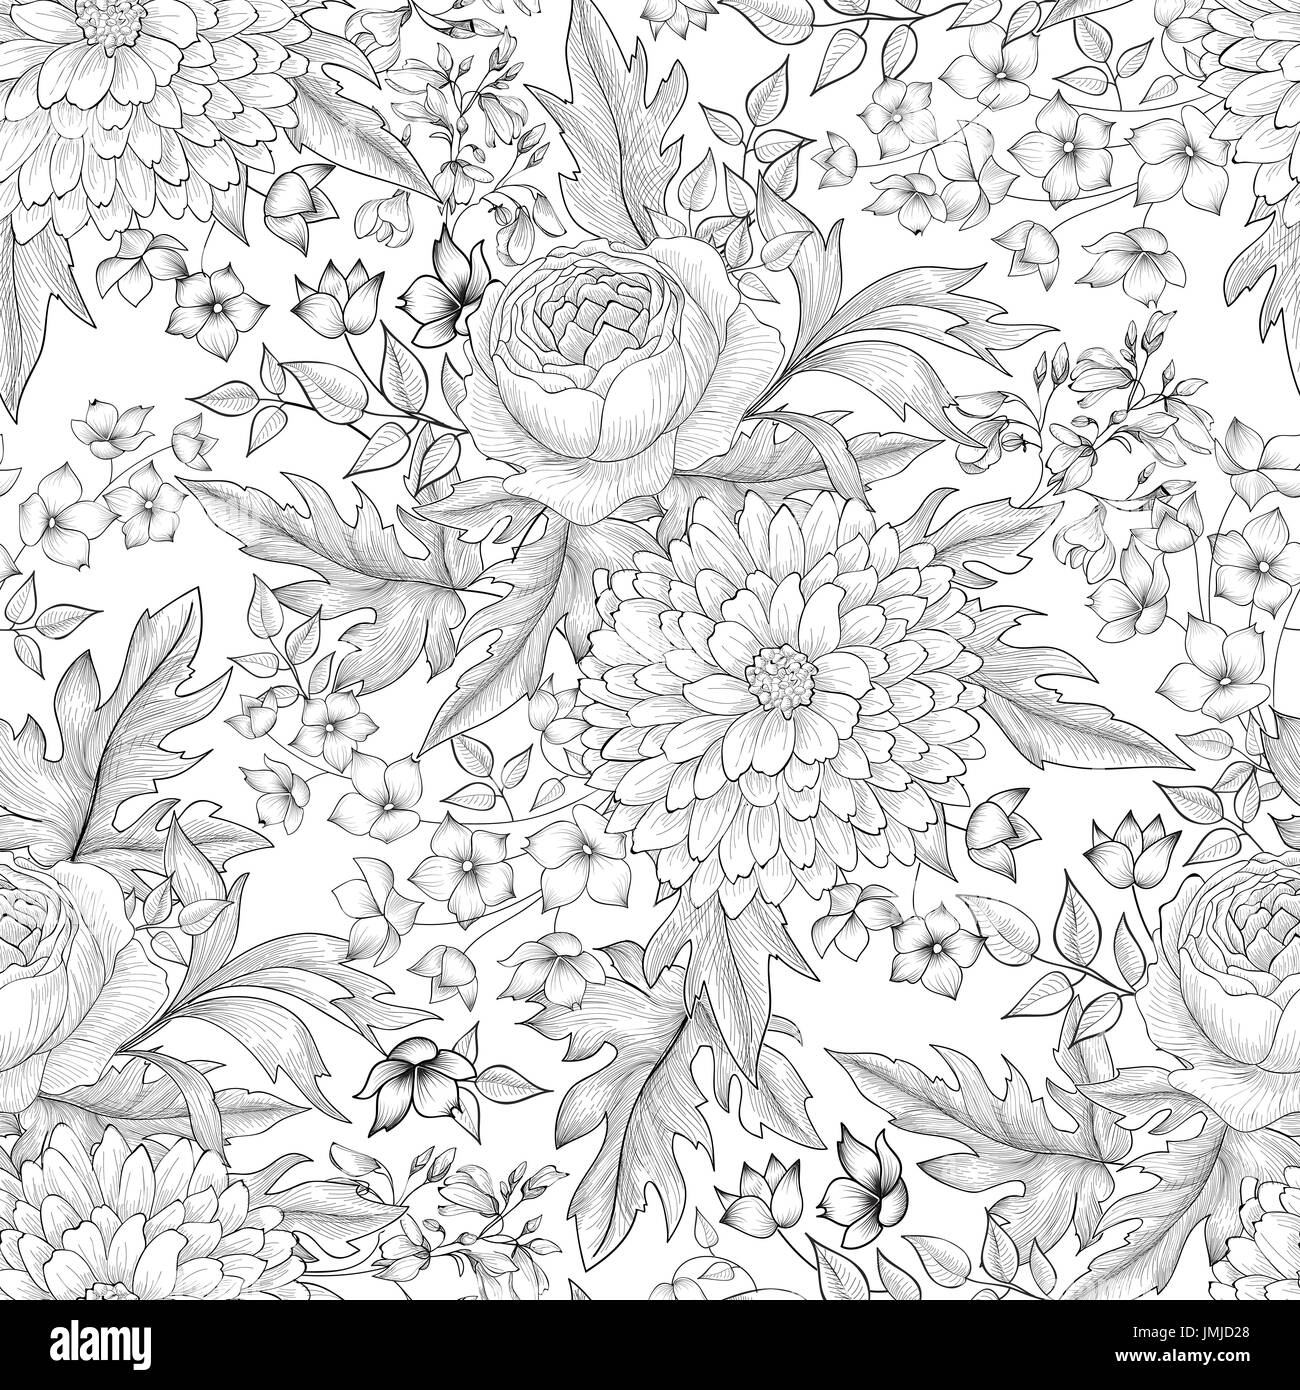 Flower bouquet seamless pattern. Floral sketch background. Engraving wallpaper Stock Vector